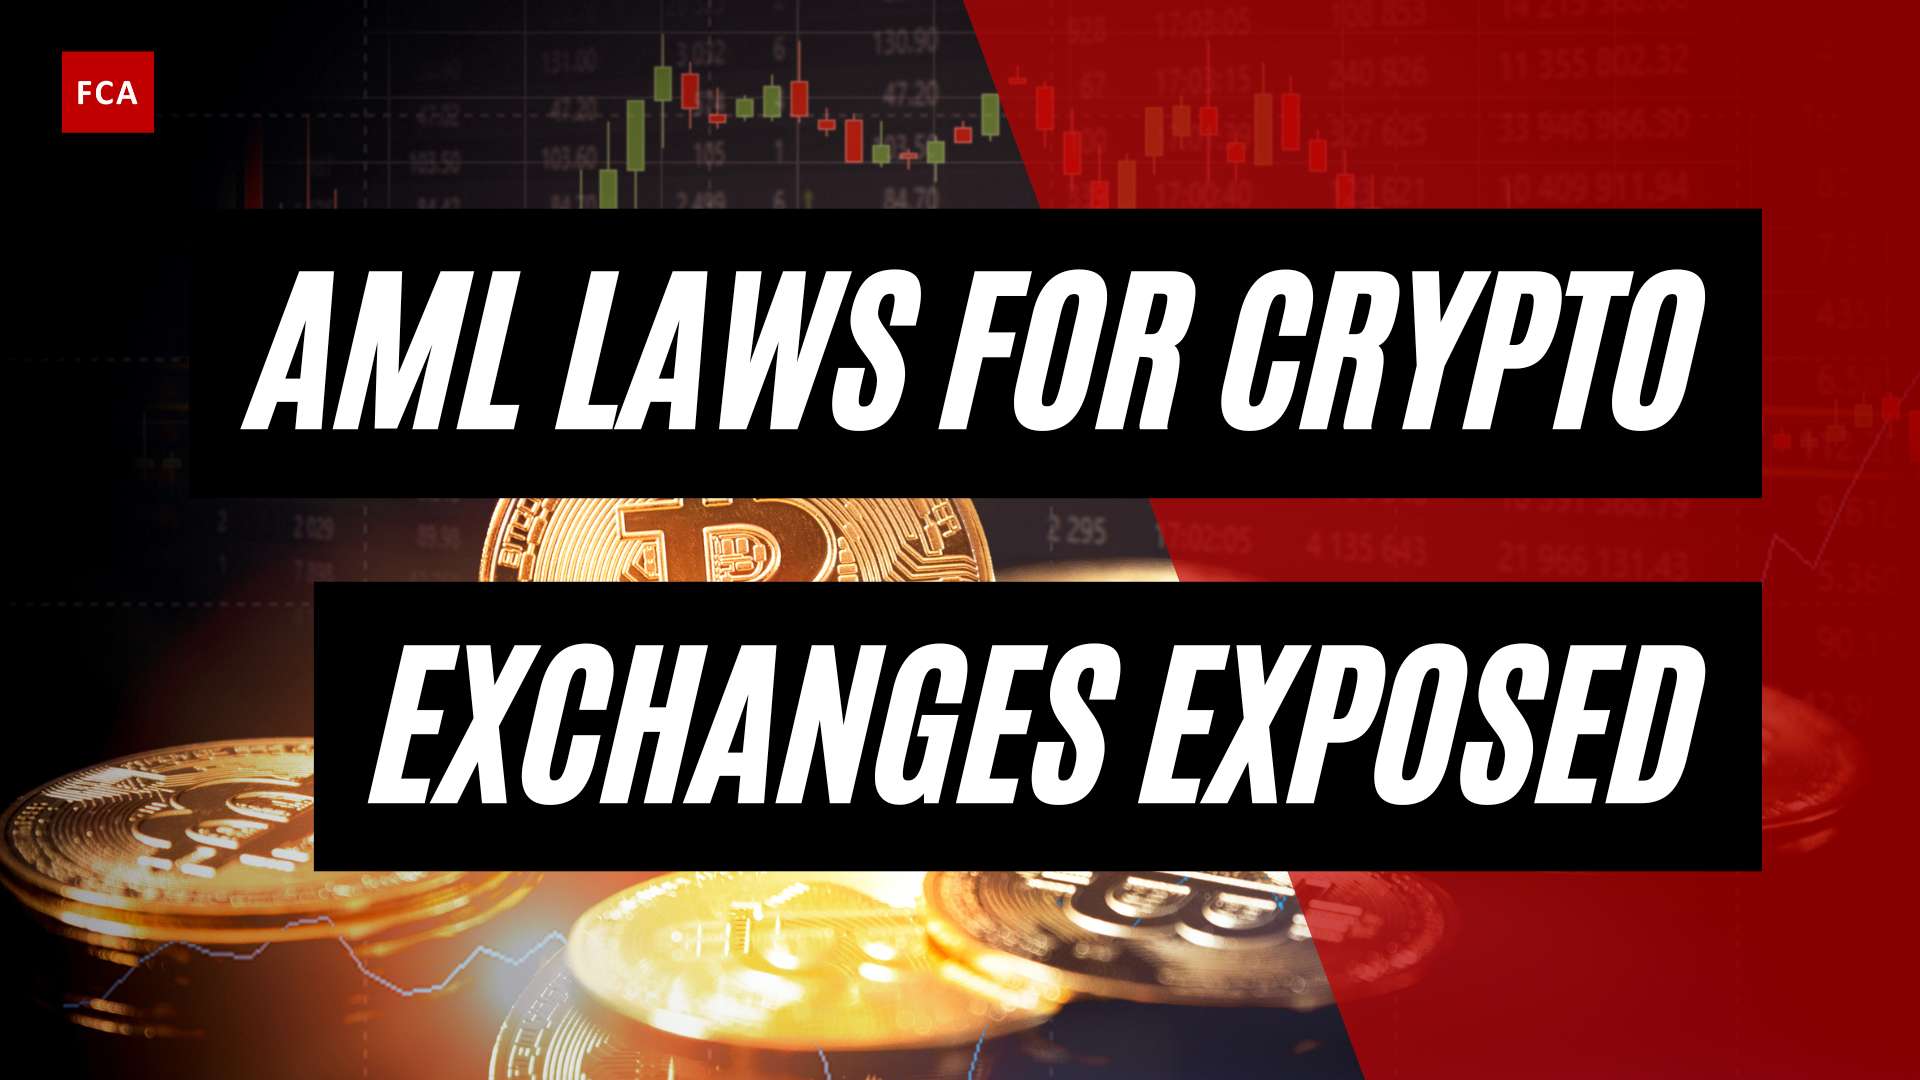 Unmasking The Regulations: Aml Laws For Crypto Exchanges Exposed